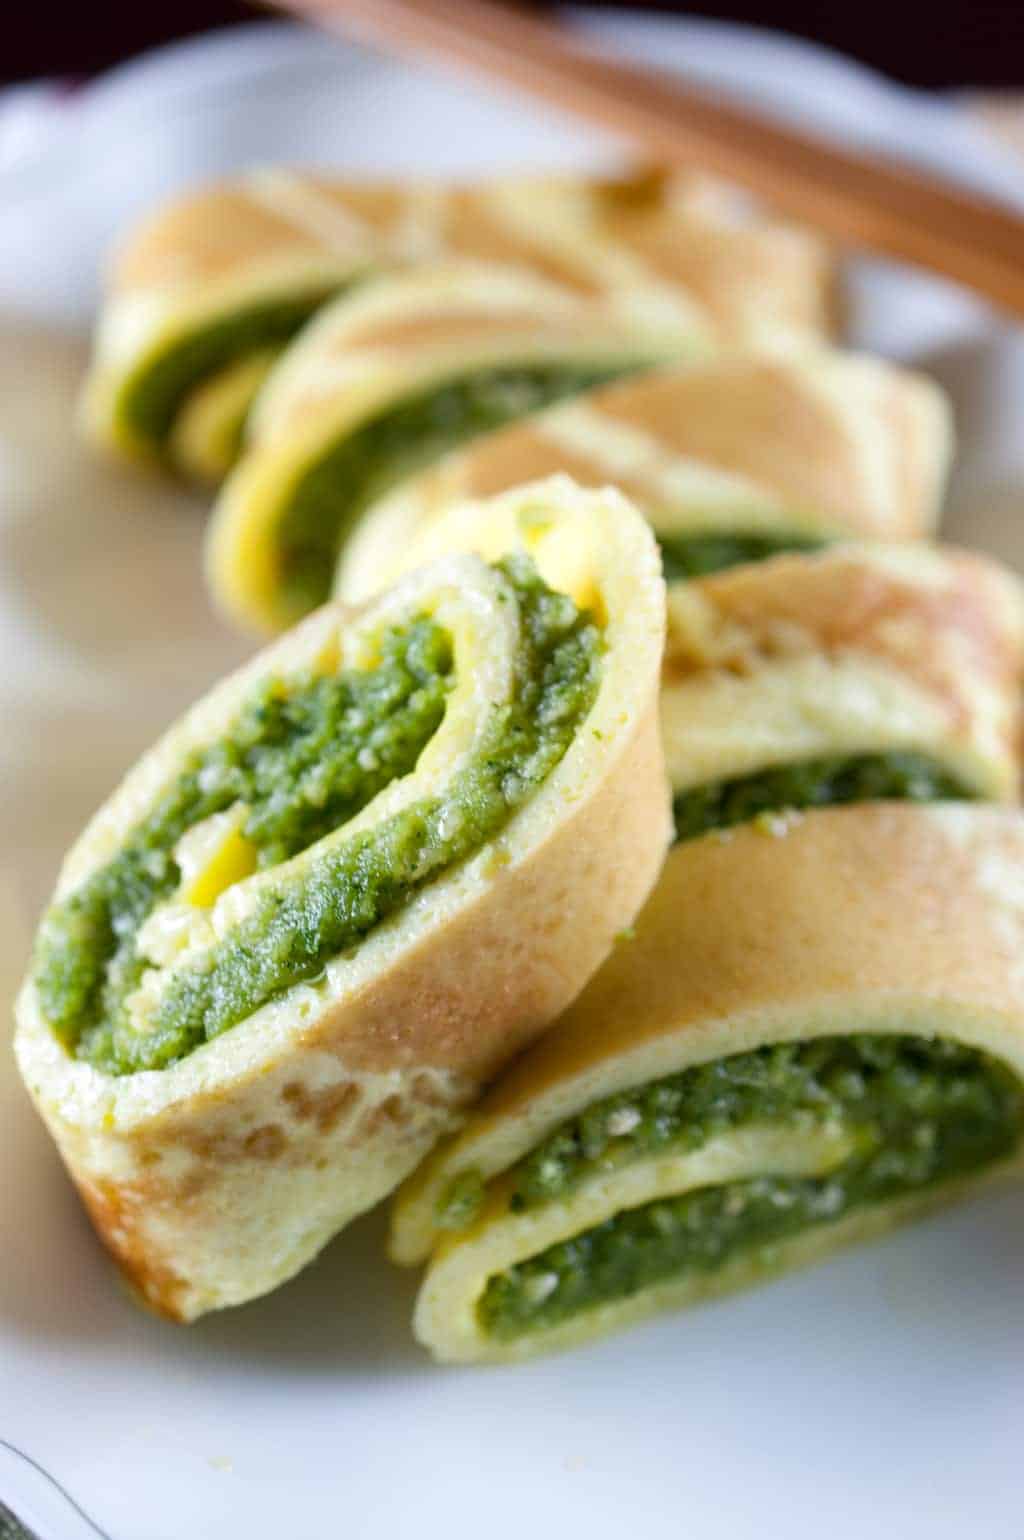 These Omelette roll stuffed with cashew cilantro paste are amazing and taste so delicious. Cashew, coriander/cilantro, and coconut paste stuffing makes it the best. An easy snack that you can whip up and serve guest quickly. You just need all the ingredients in hand. 